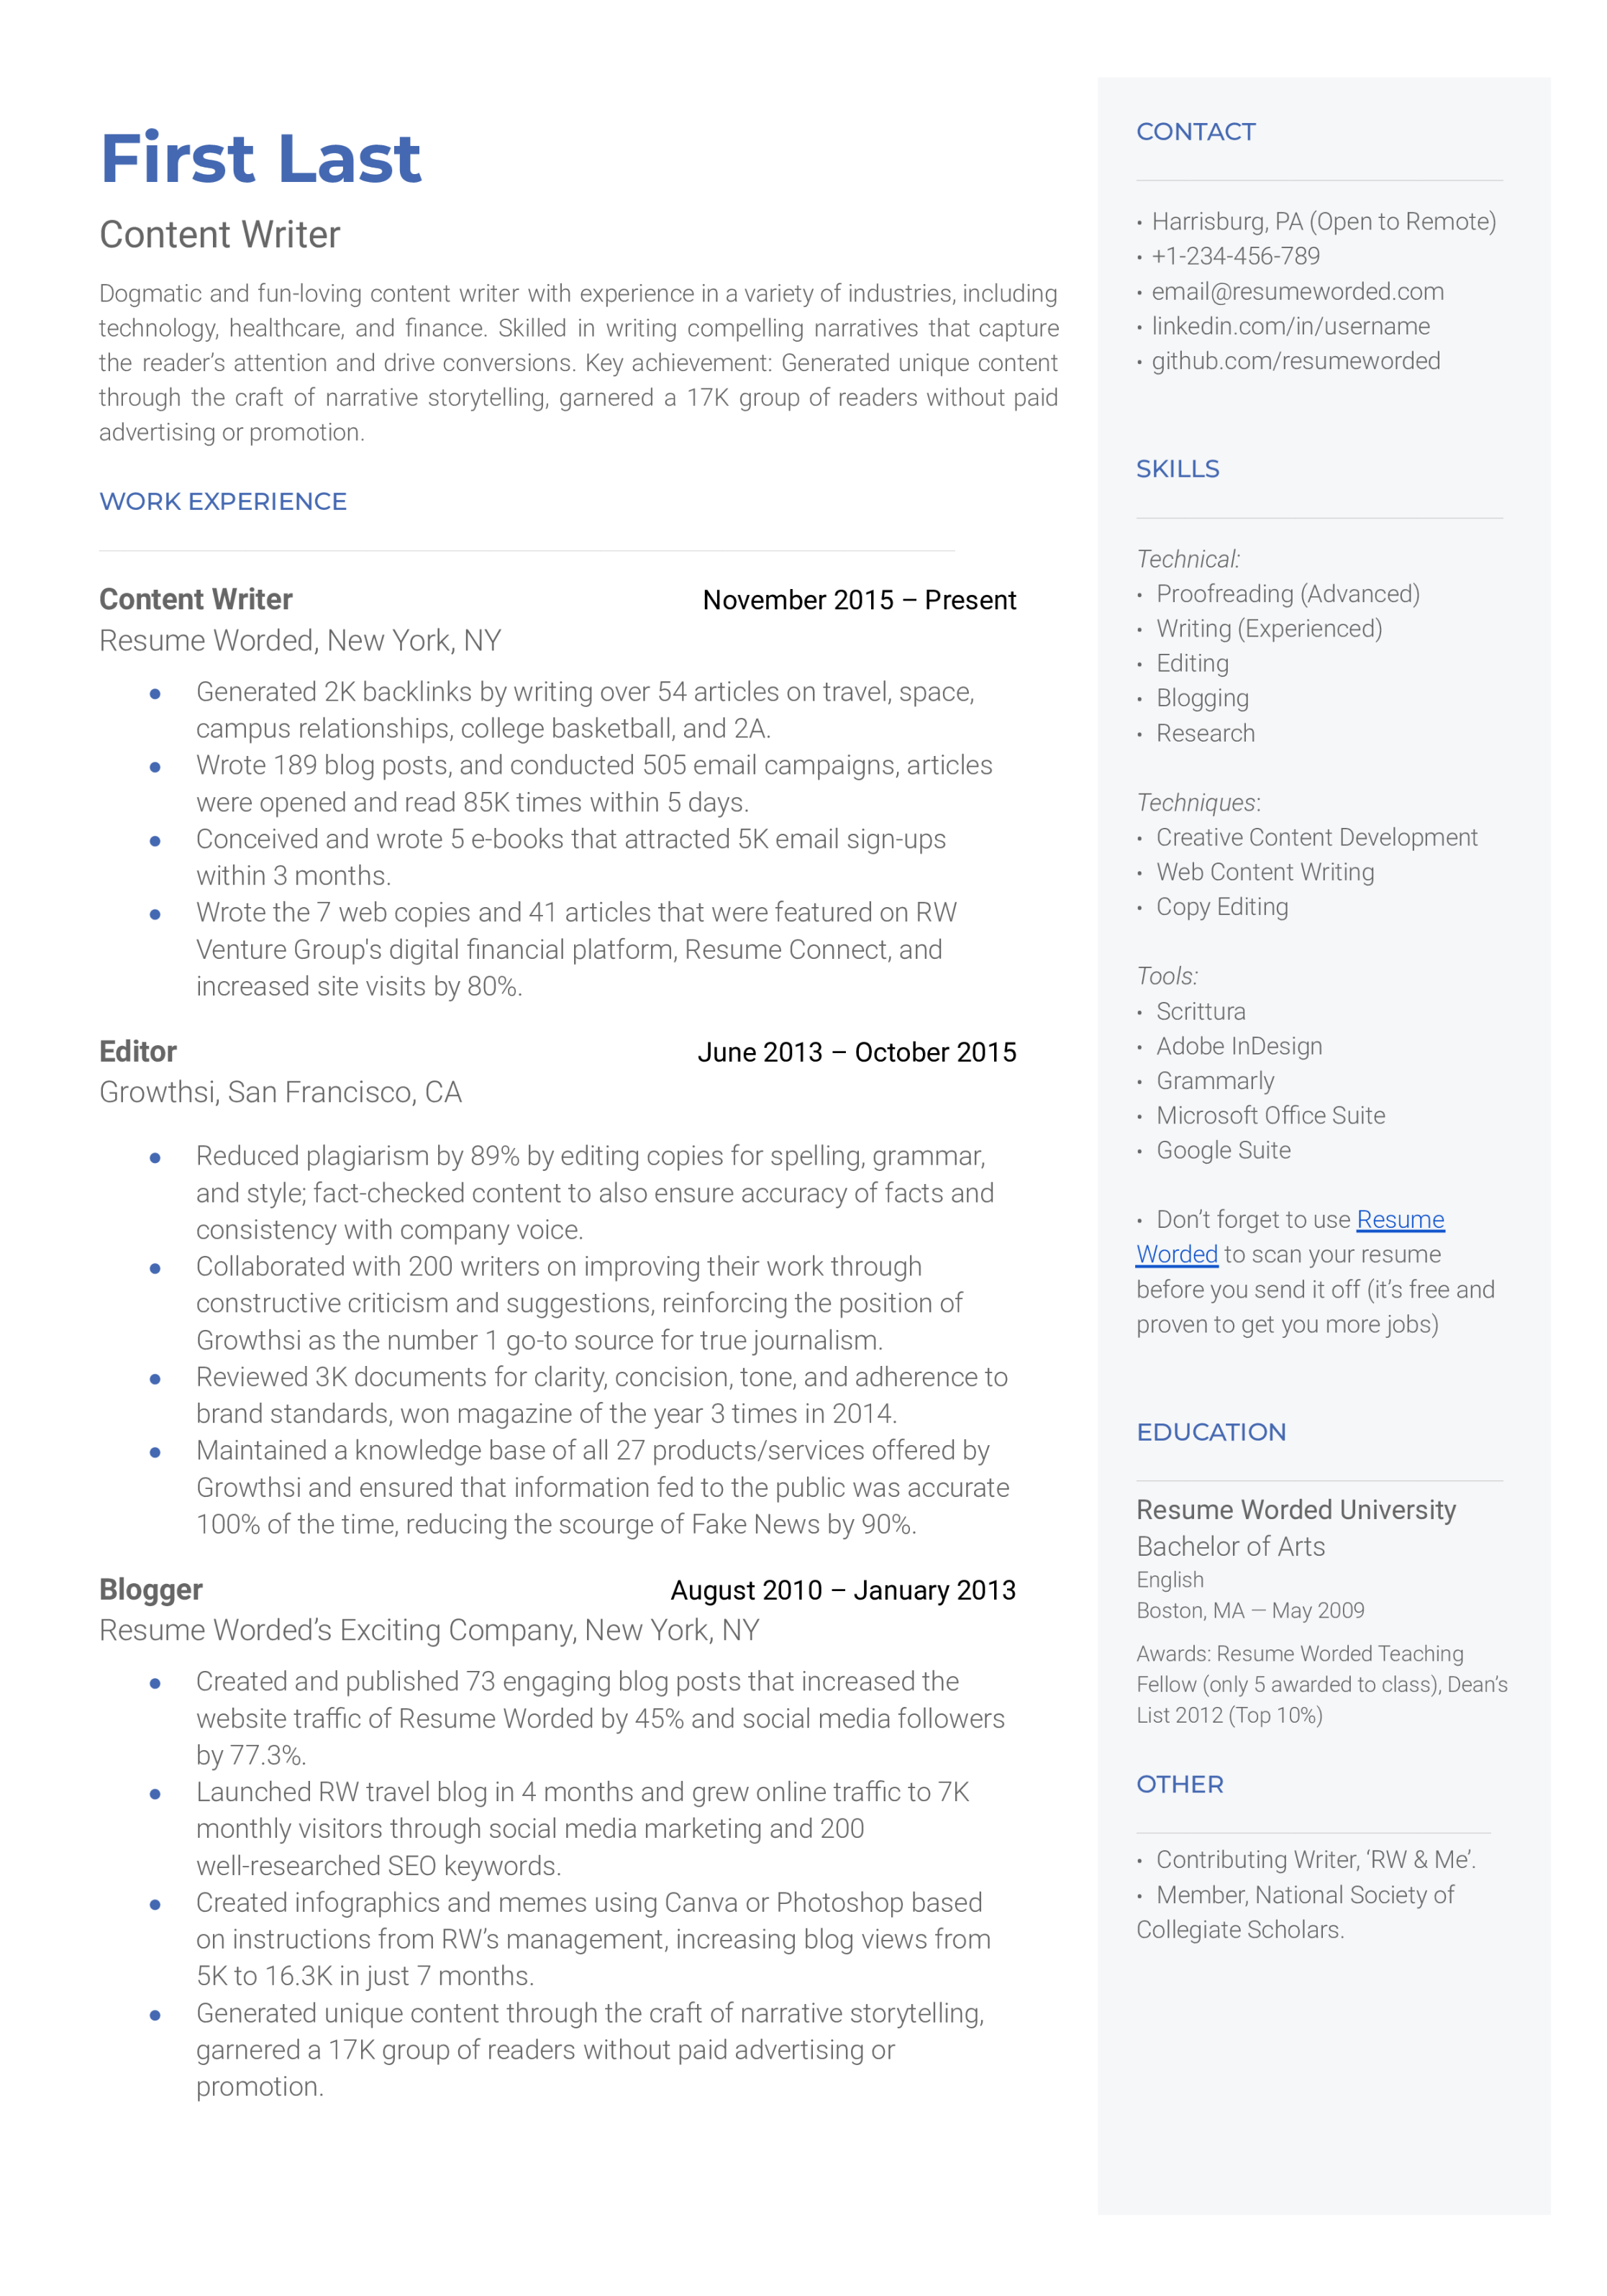 content writer resume examples for resume worded